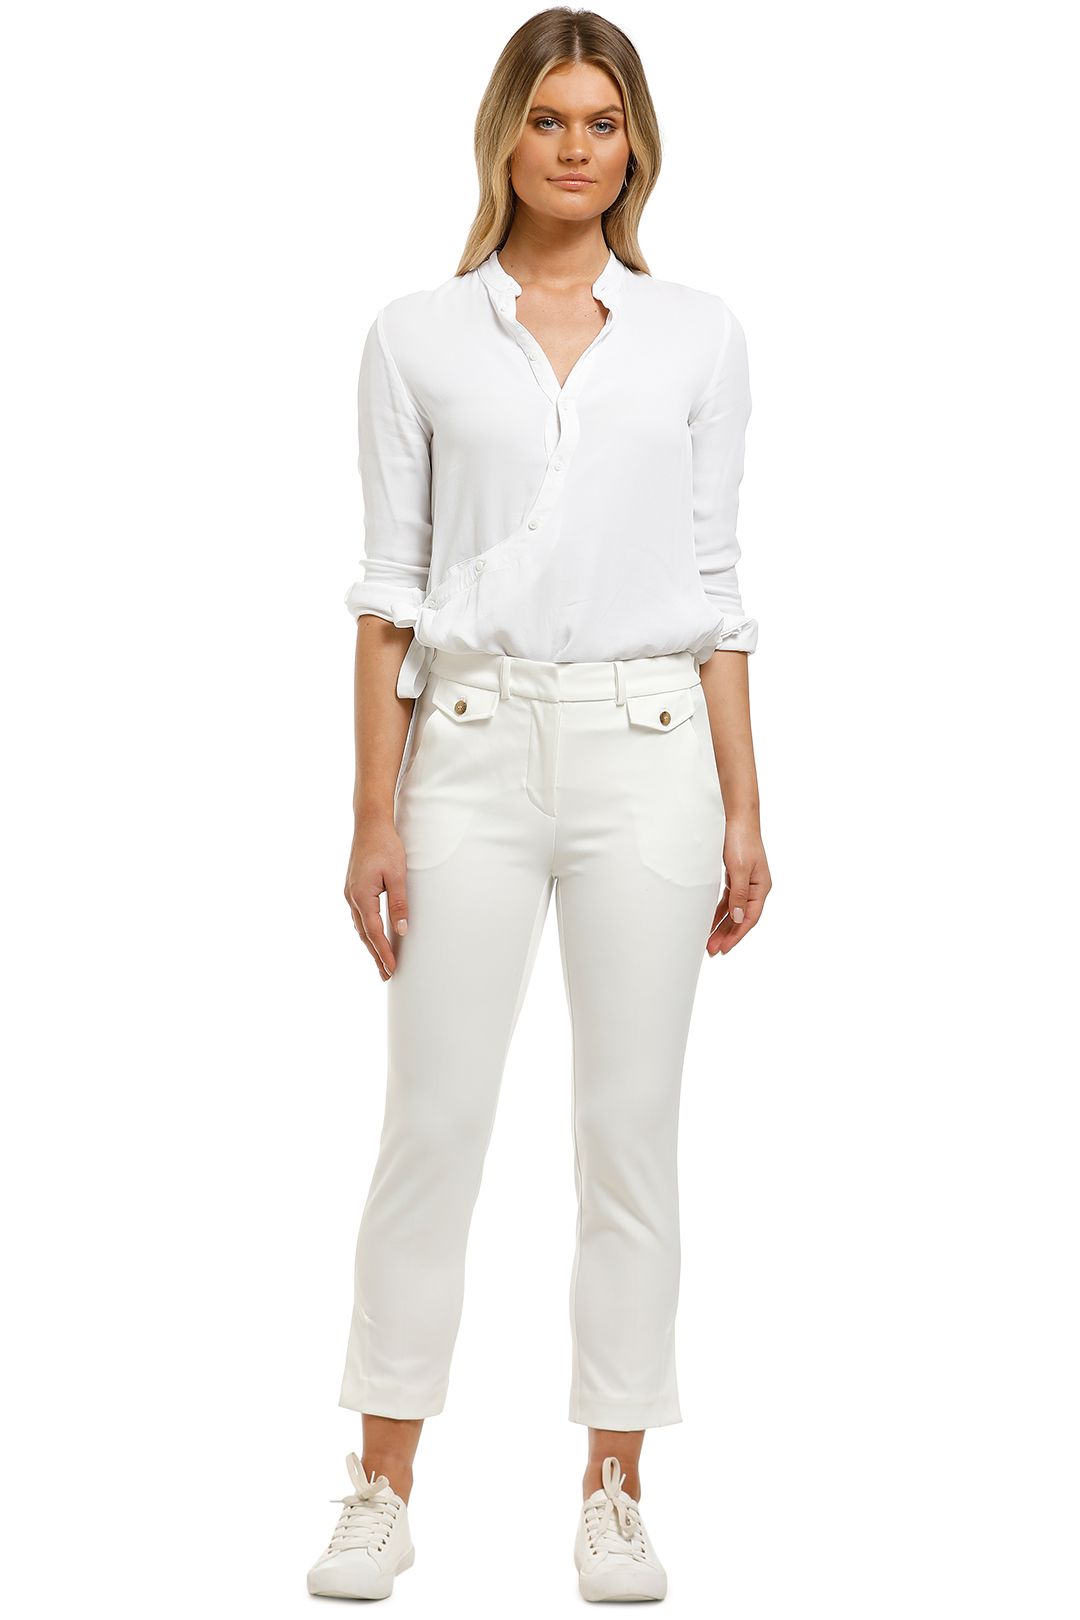 Country-Road-DBL-Cloth-Slim-Pant-Antique-White-Front